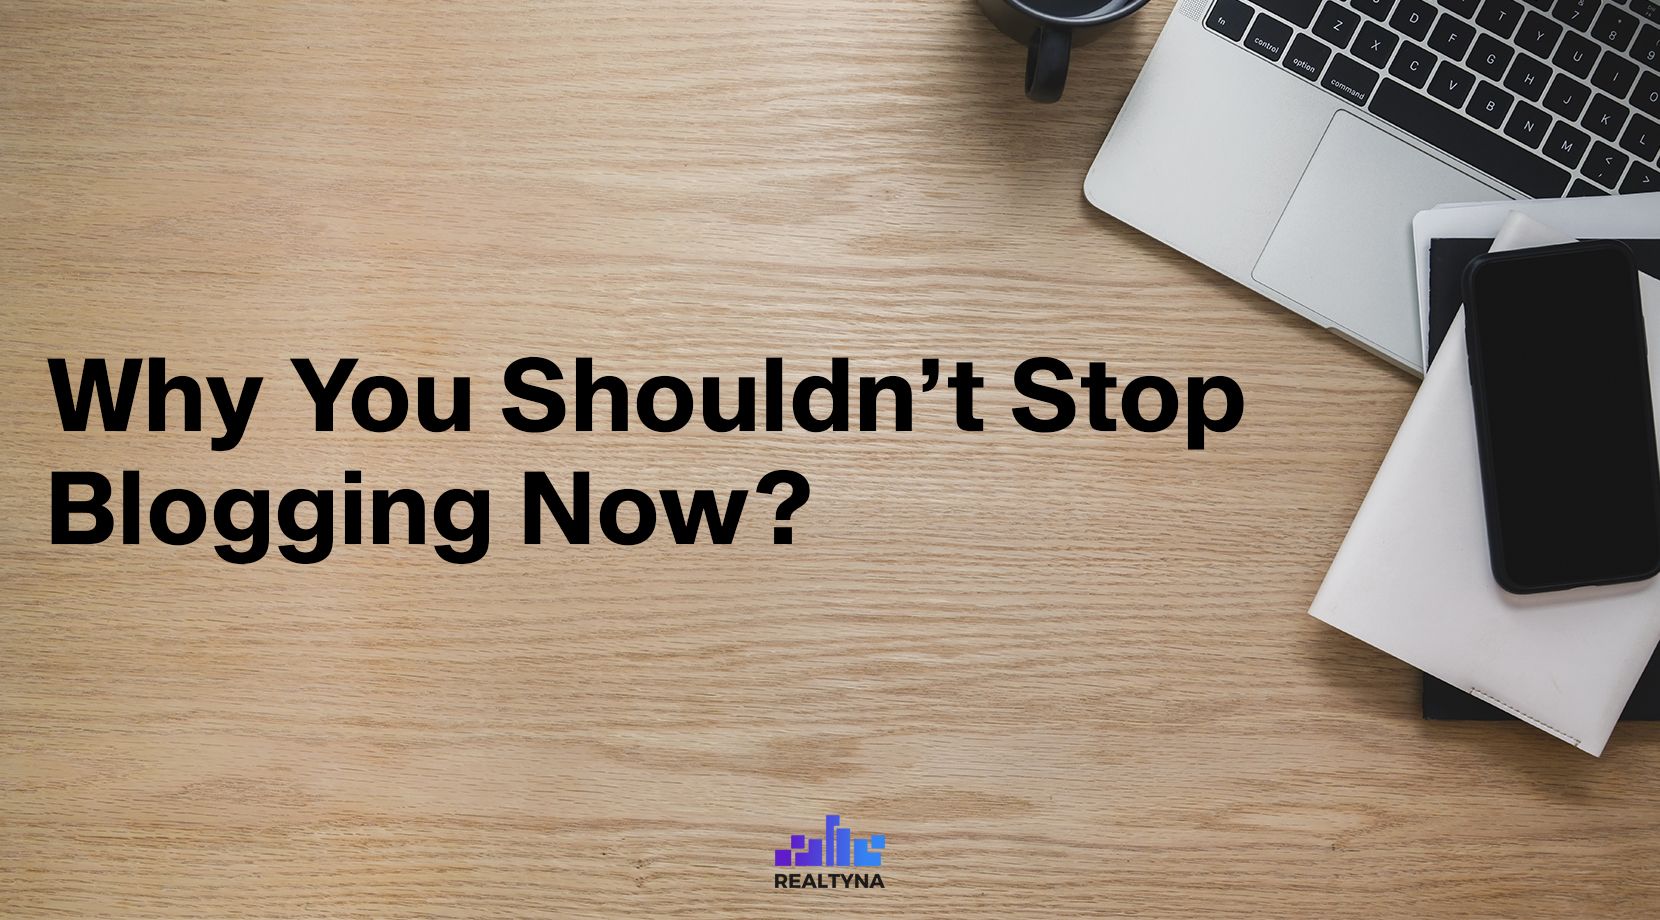 Why You Shouldn’t Stop Blogging Now?